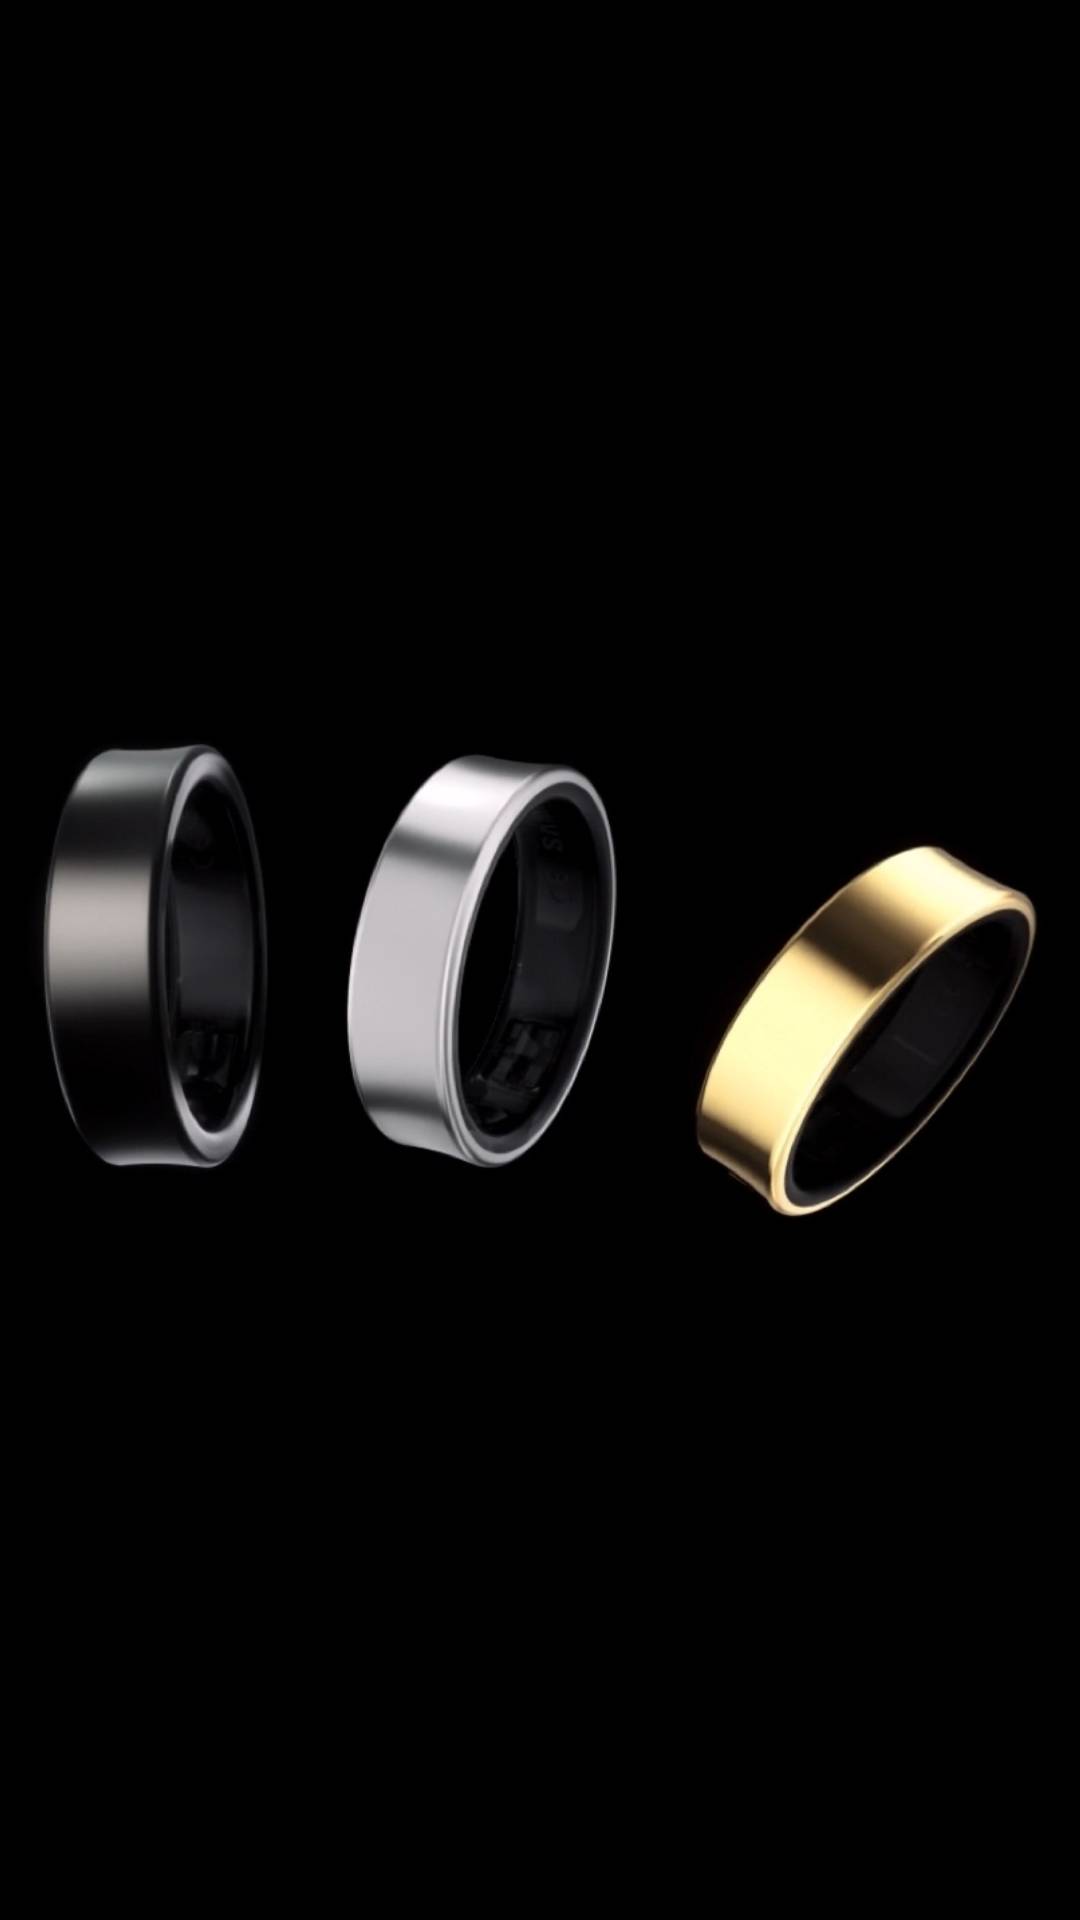 Samsung launched its much-awaited Galaxy Ring: Top feature here